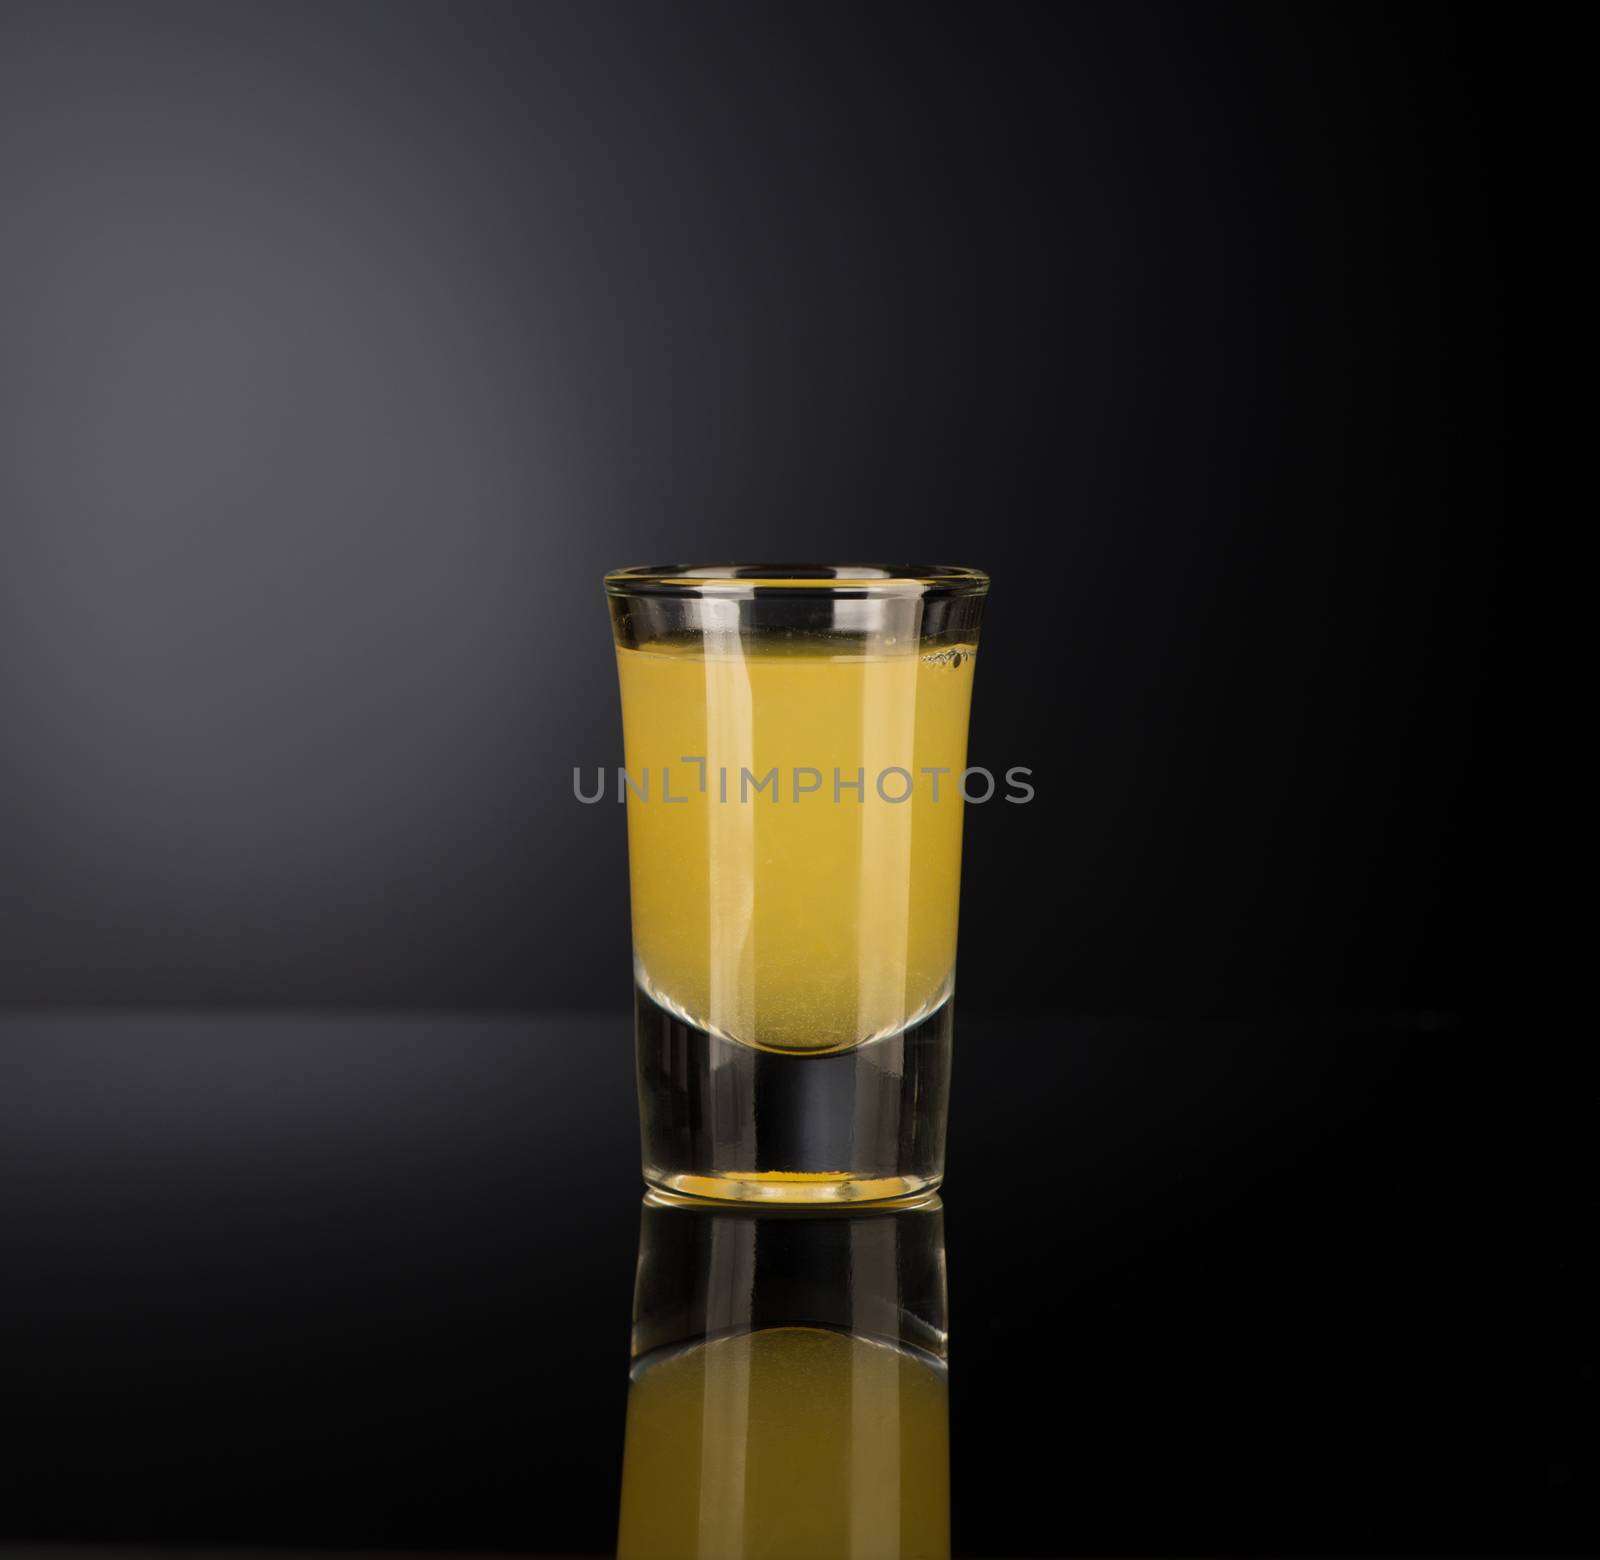 yellow alcoholic liquor in a shot glass isolated on dark background with backlight